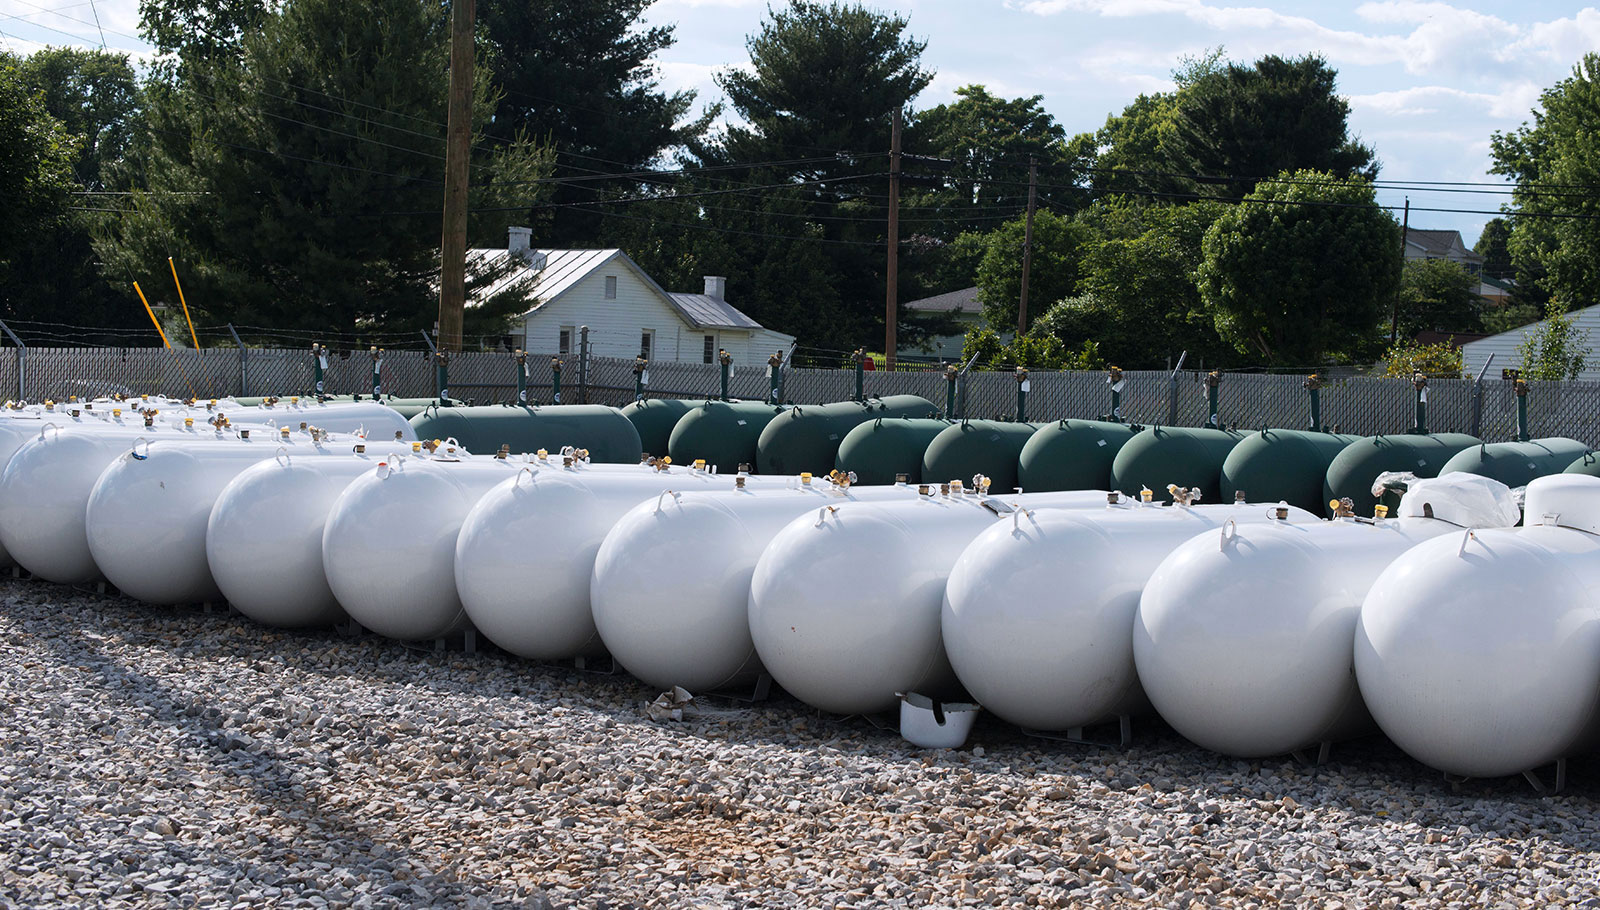 Row of large propane tanks ready for installation